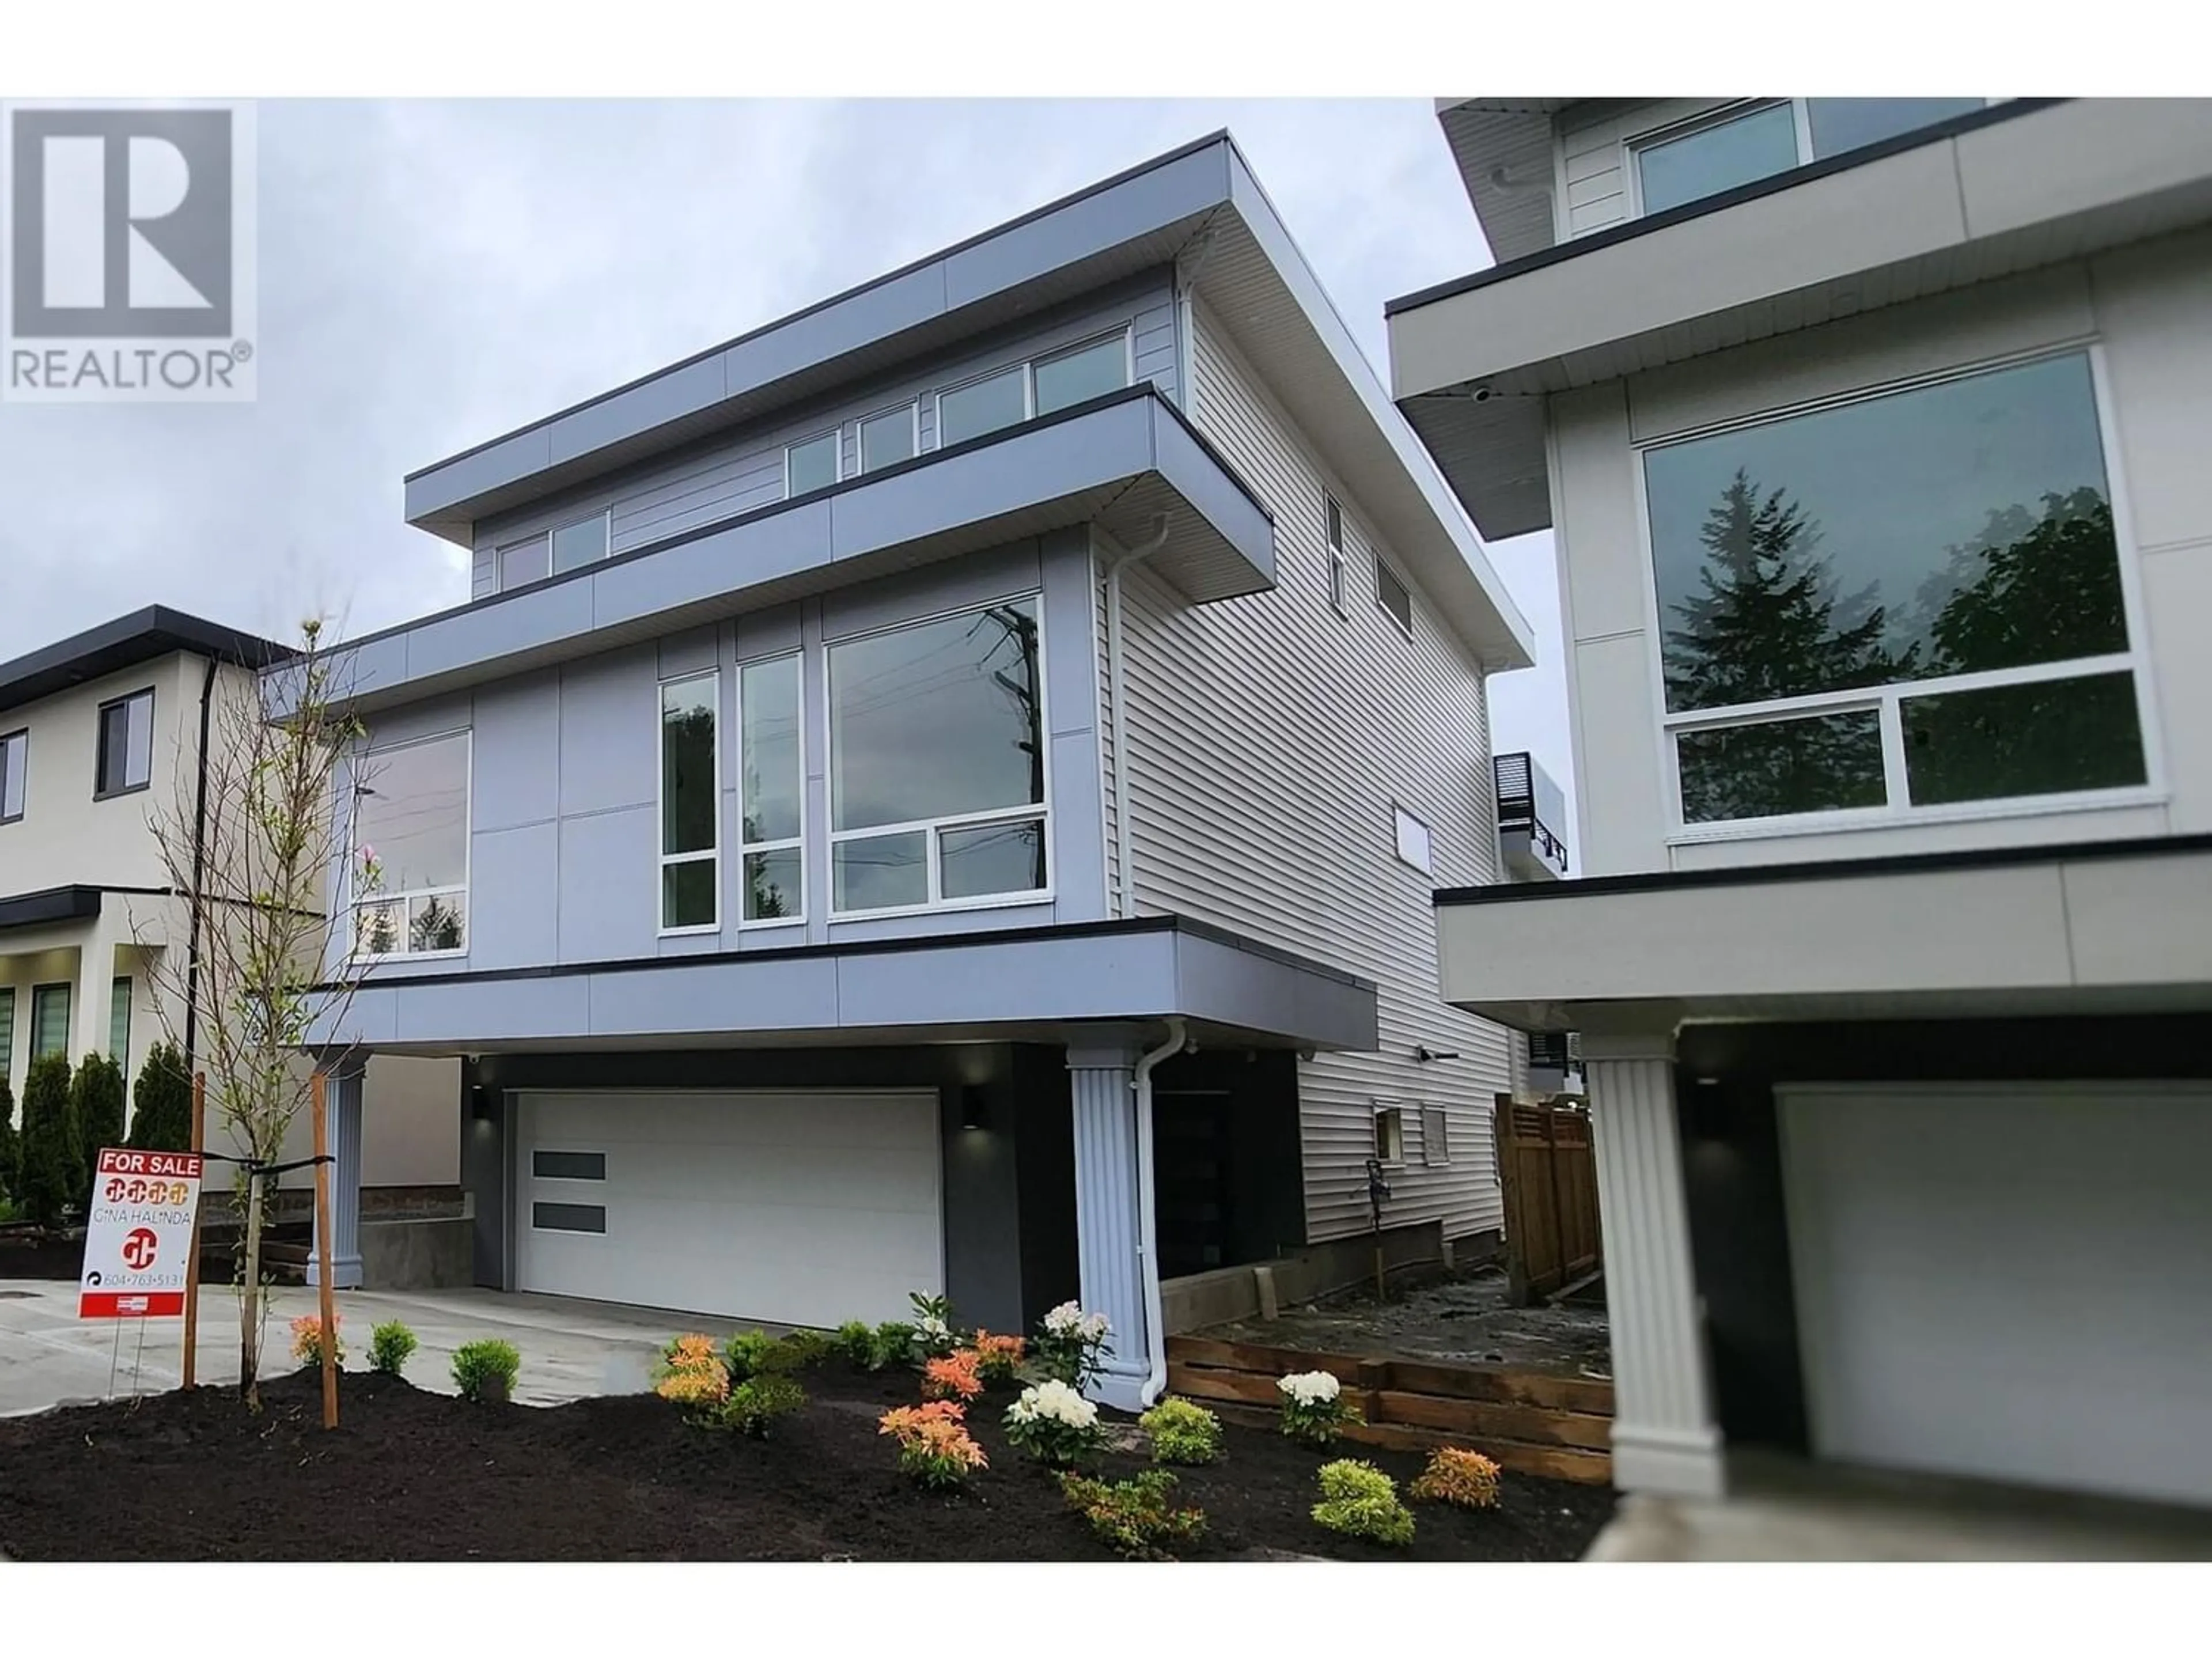 A pic from exterior of the house or condo for 22829 122 AVENUE, Maple Ridge British Columbia V2X3Y1